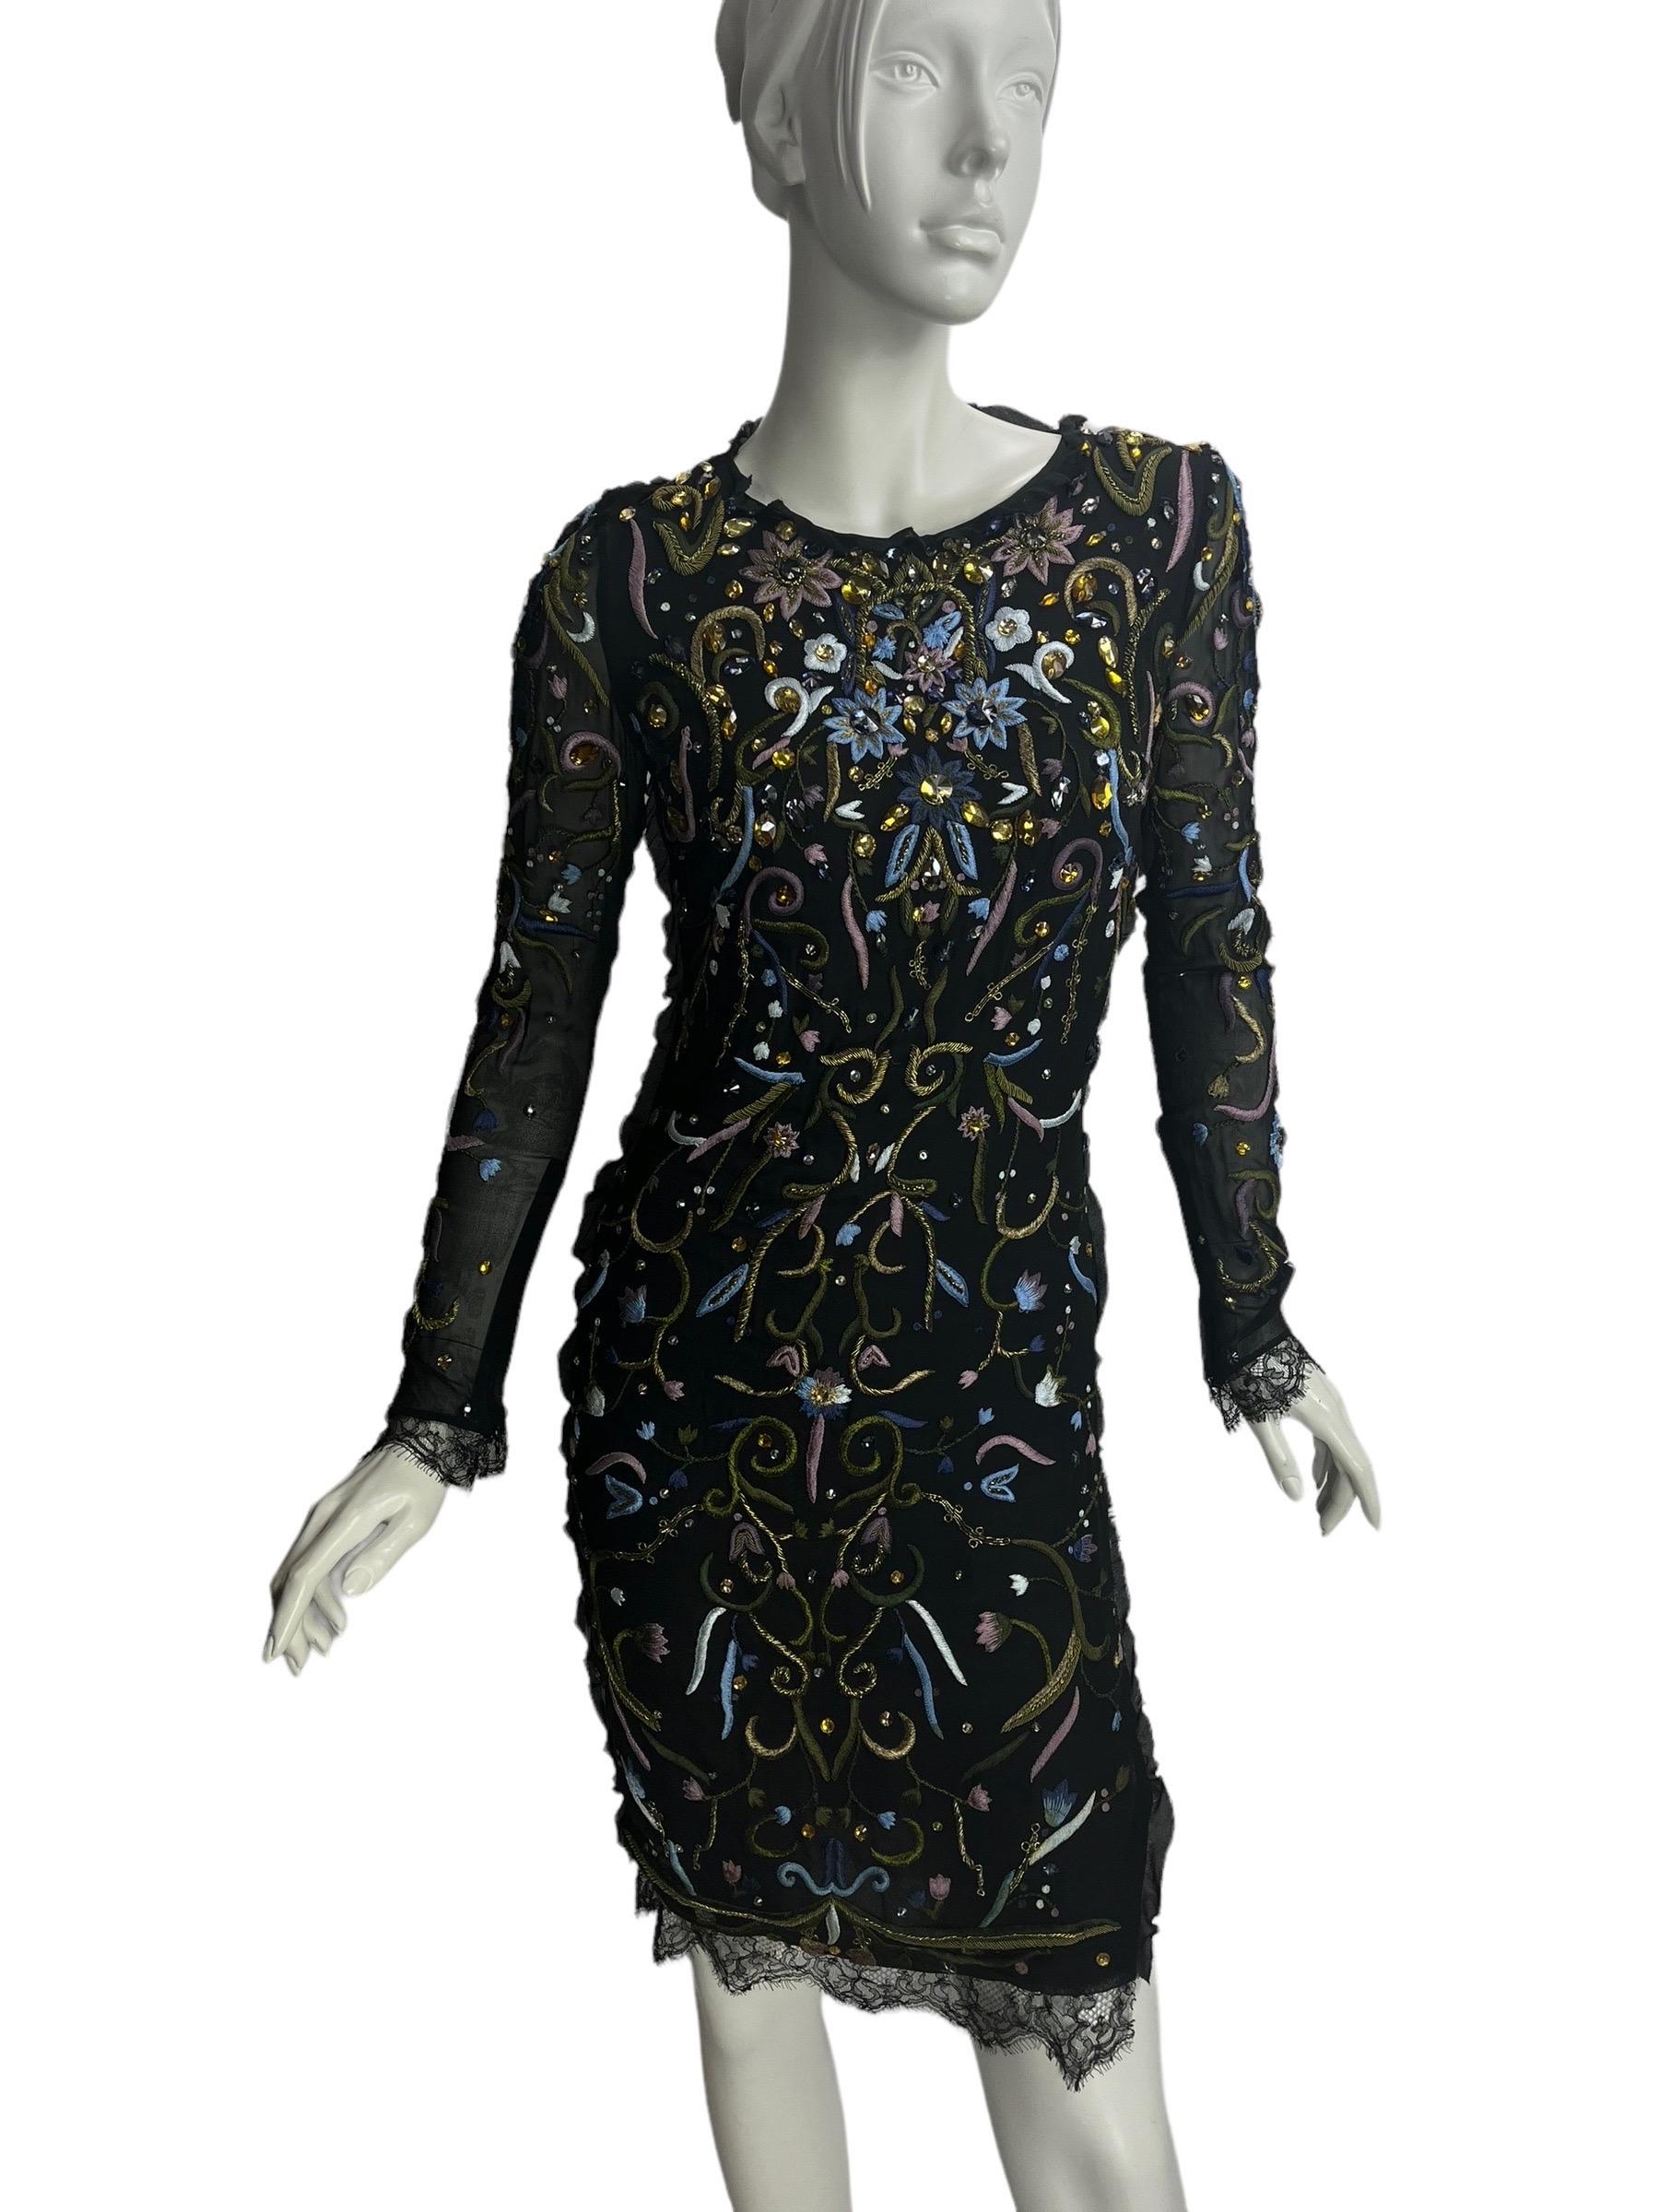 Vintage Emilio Pucci embroidered and crystal embellished black silk dress
100% Chiffon Silk, fully lined. Lace trim. Side zipper.
IT Size 42 - US 6
Made in Italy
Excellent condition